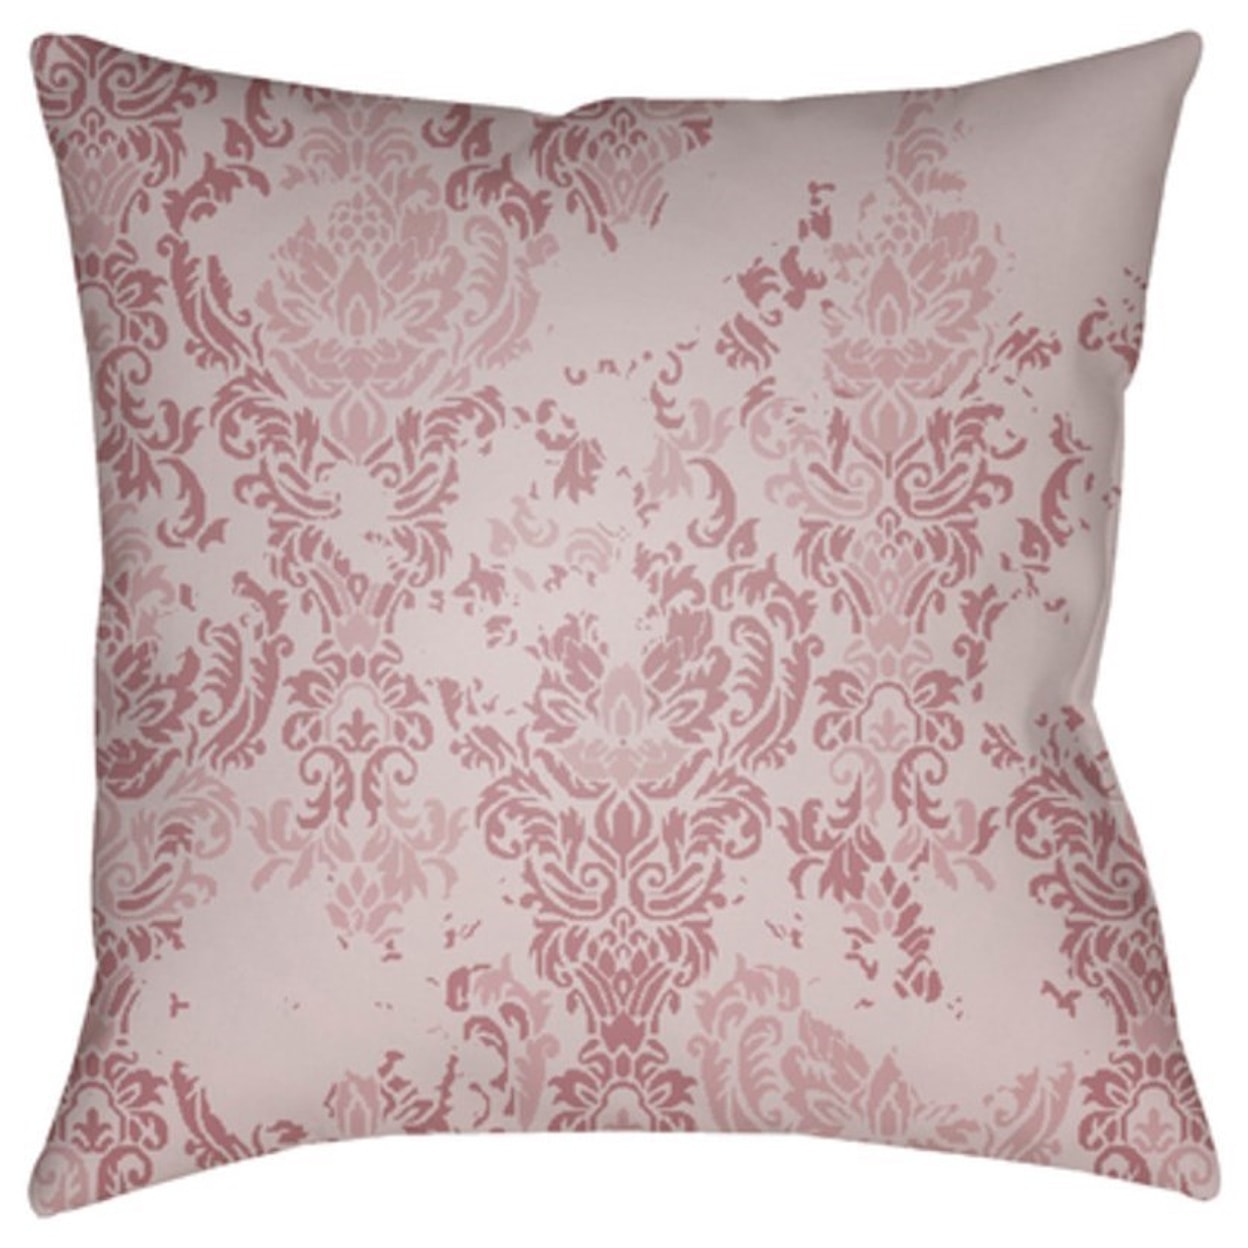 Ruby-Gordon Accents Moody Damask Pillow